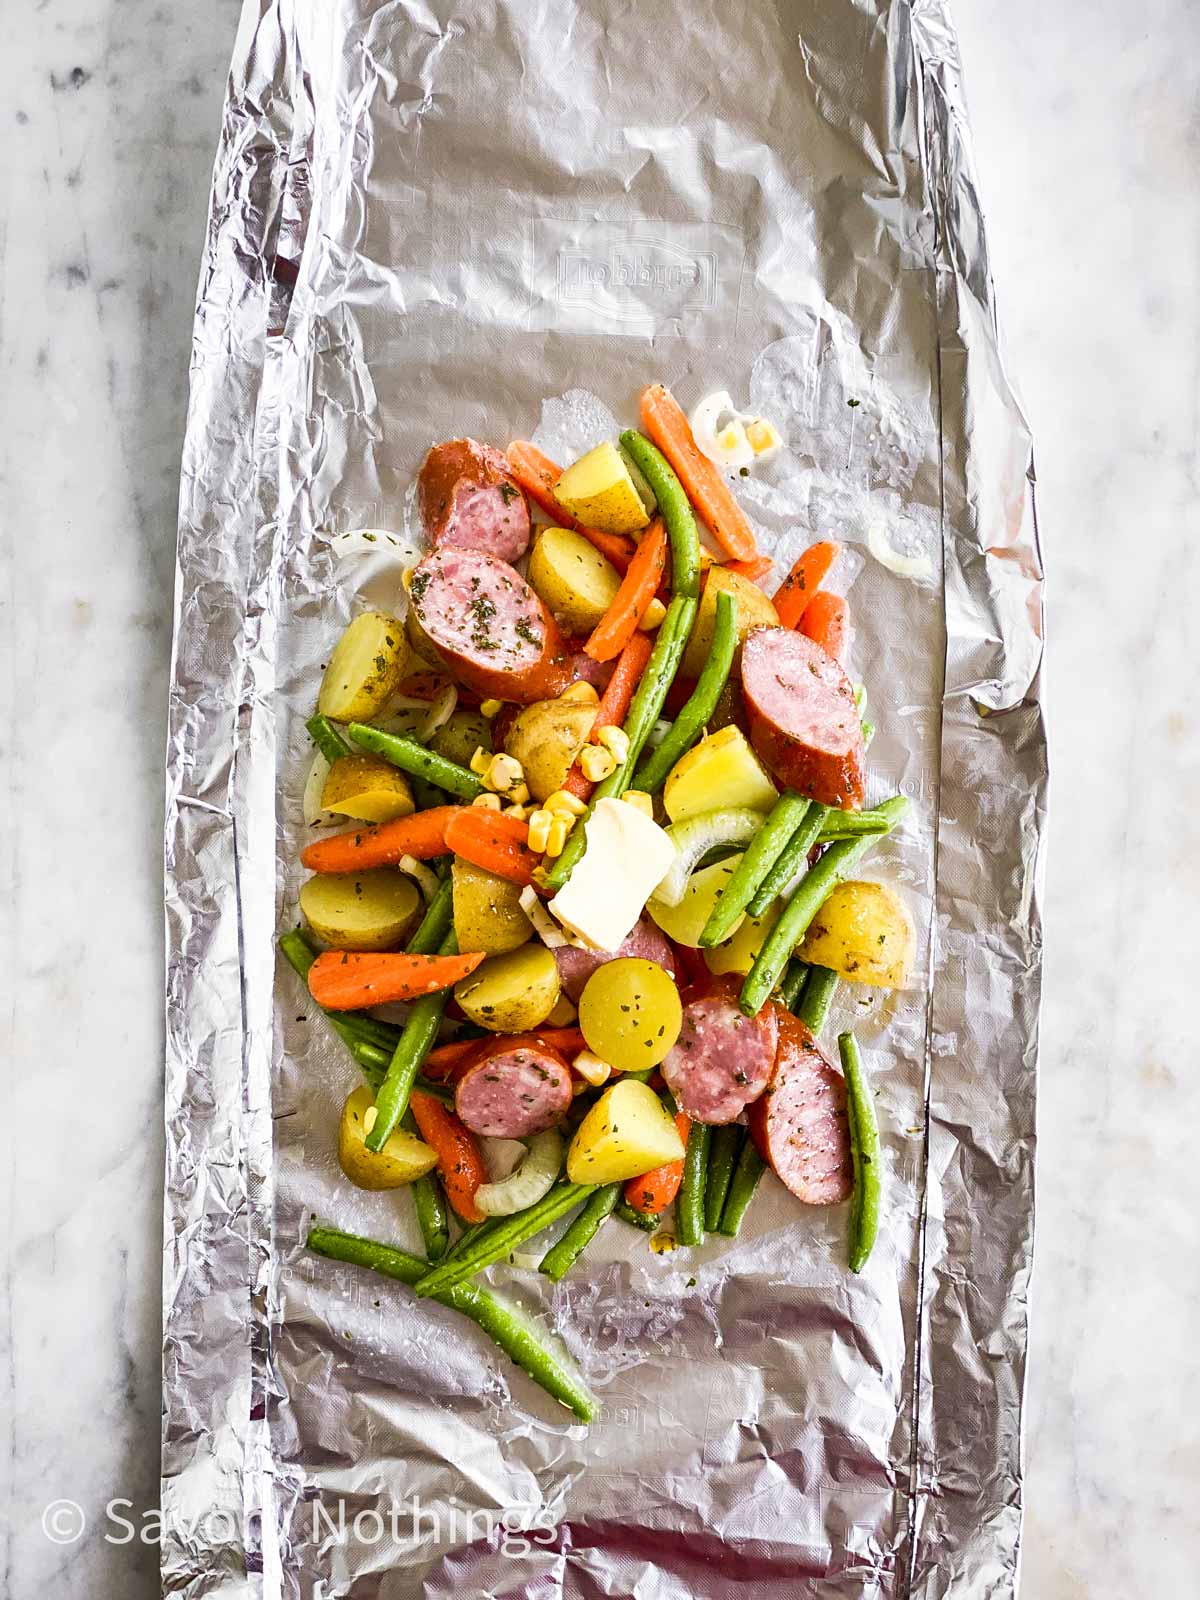 Grillwurst and Summer Vegetable Foil Packets - Pillers